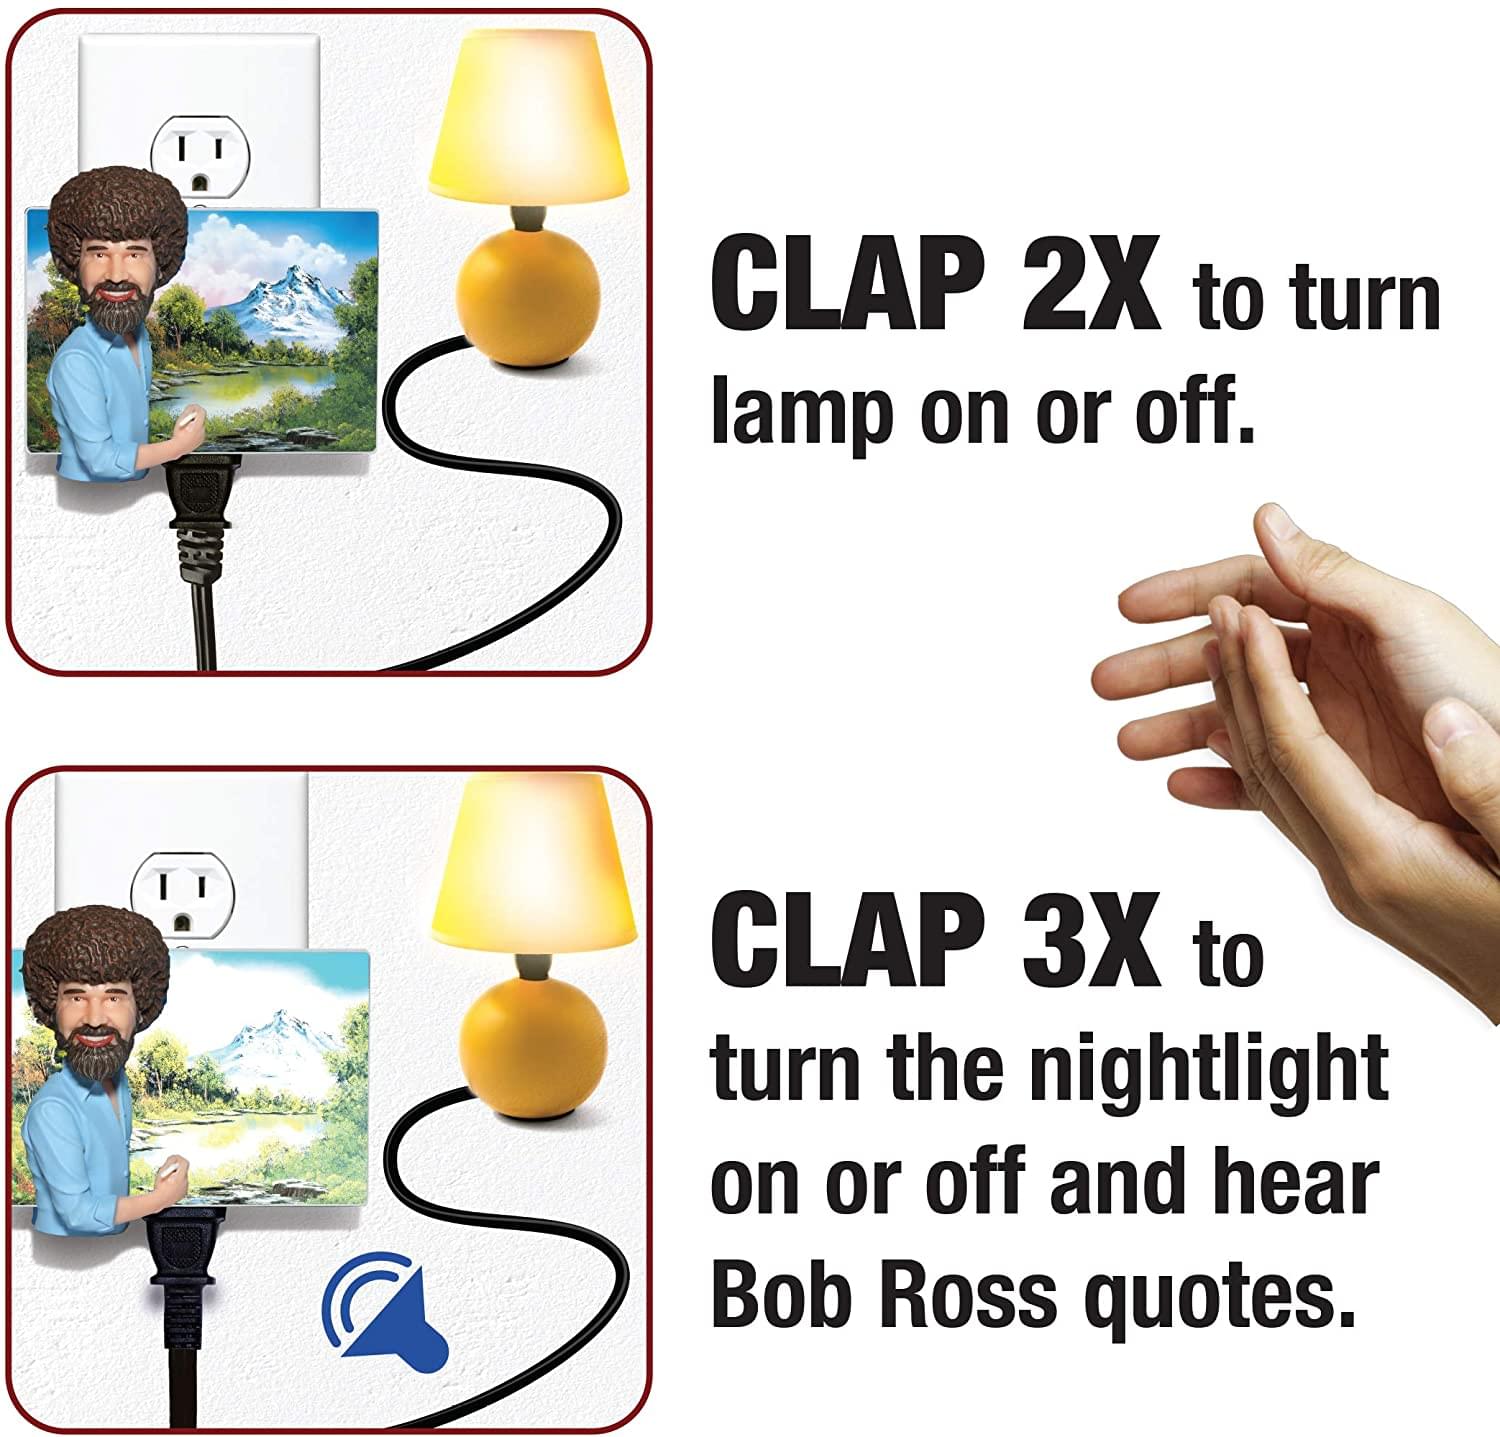 Child Talking Clapper with Night Lamp Light Switch Outlet